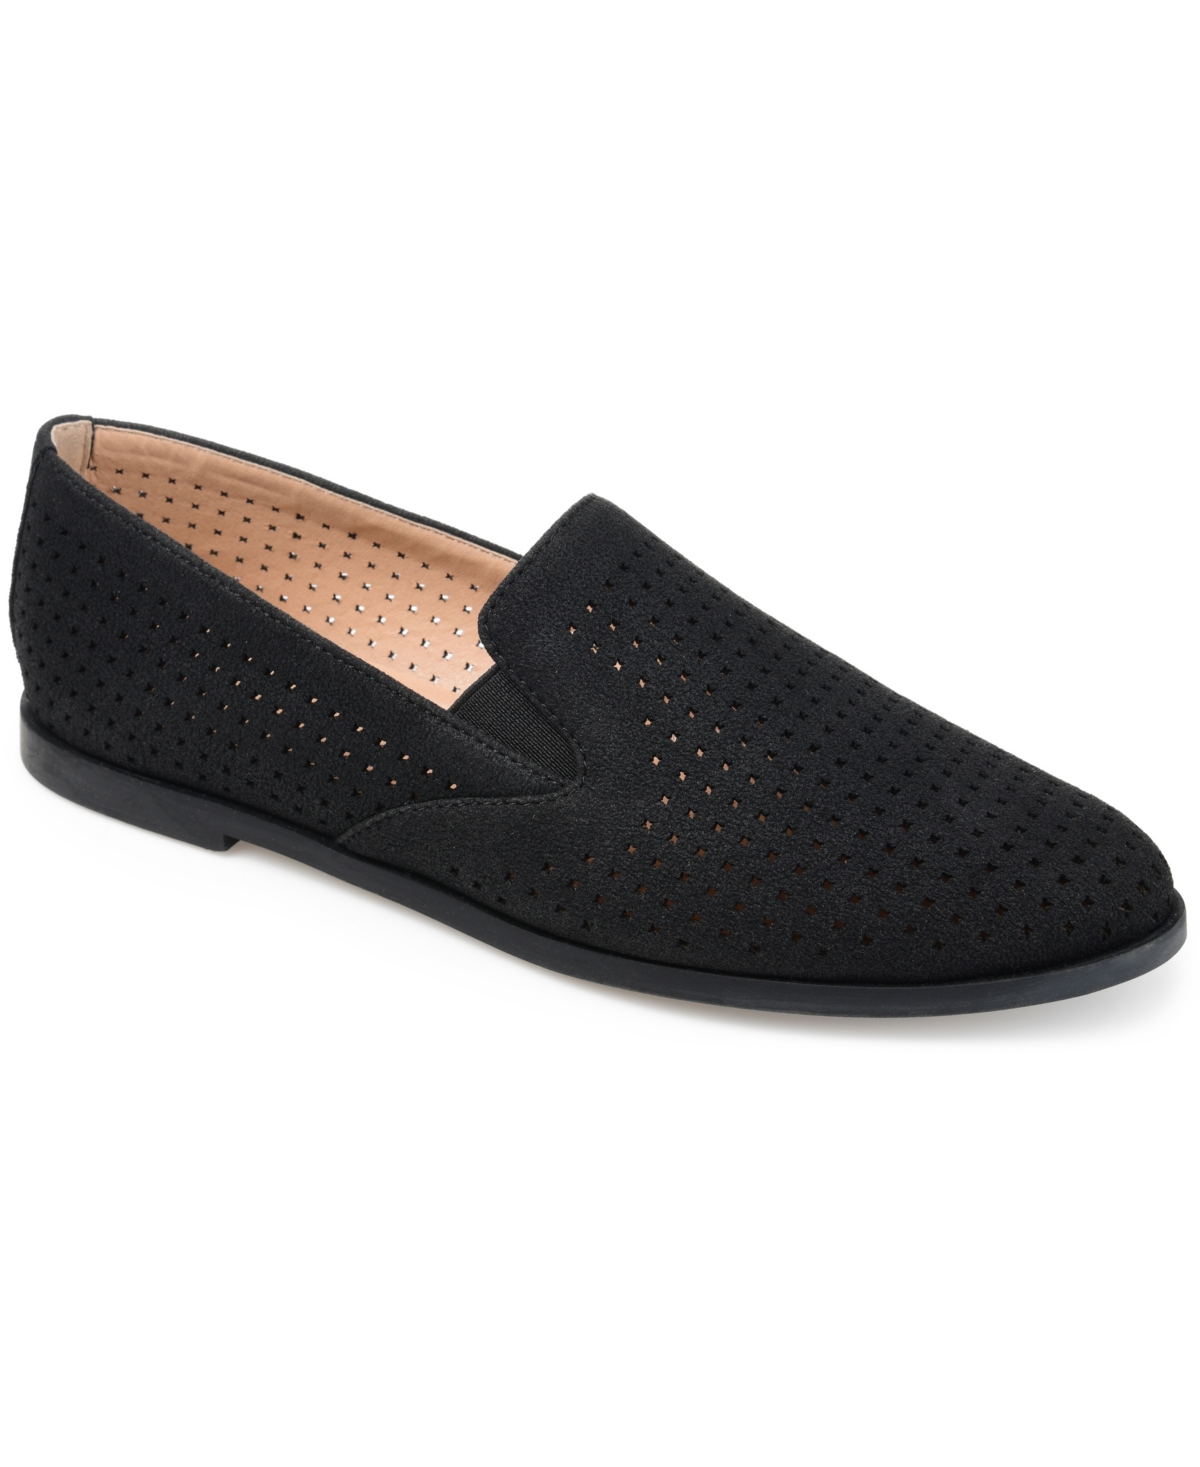 Women's Lucie Perforated Slip On Loafers - Pink